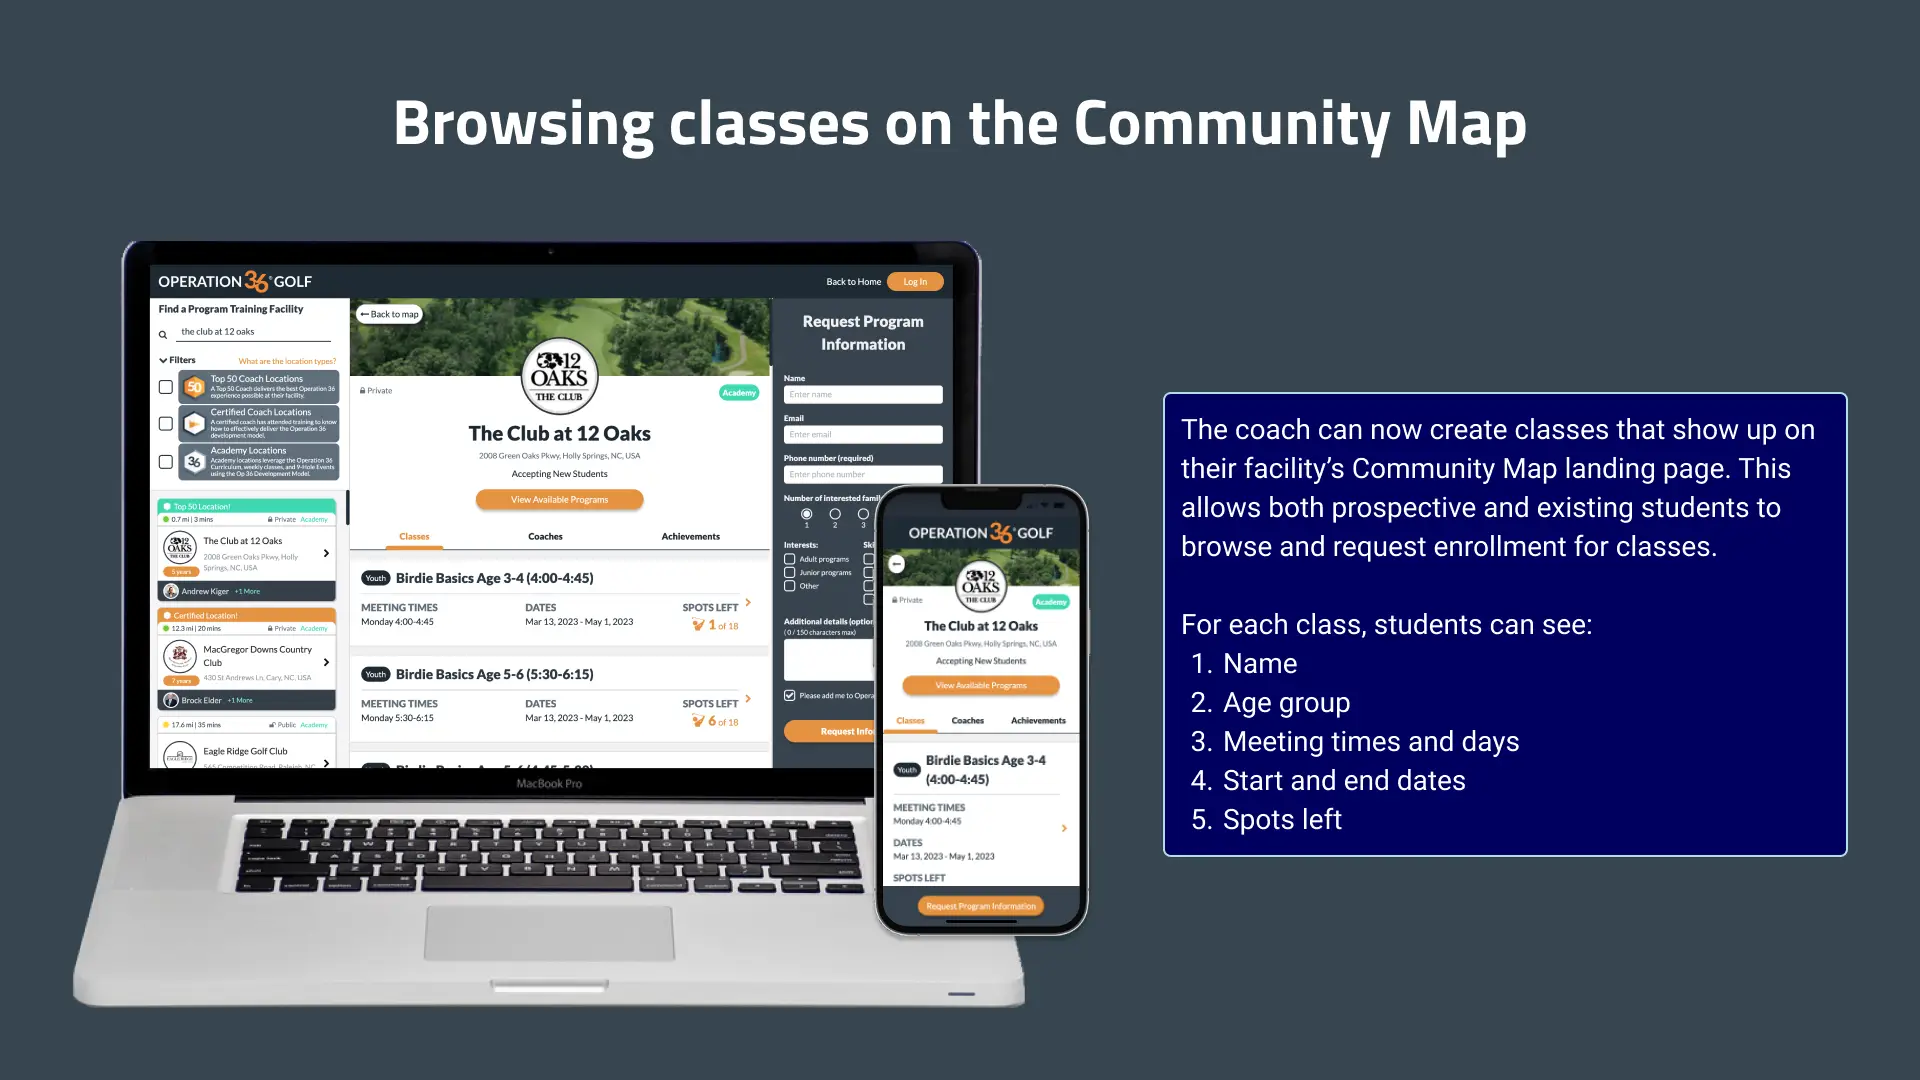 The new Community Map displays classes available for registration at every community/facility.